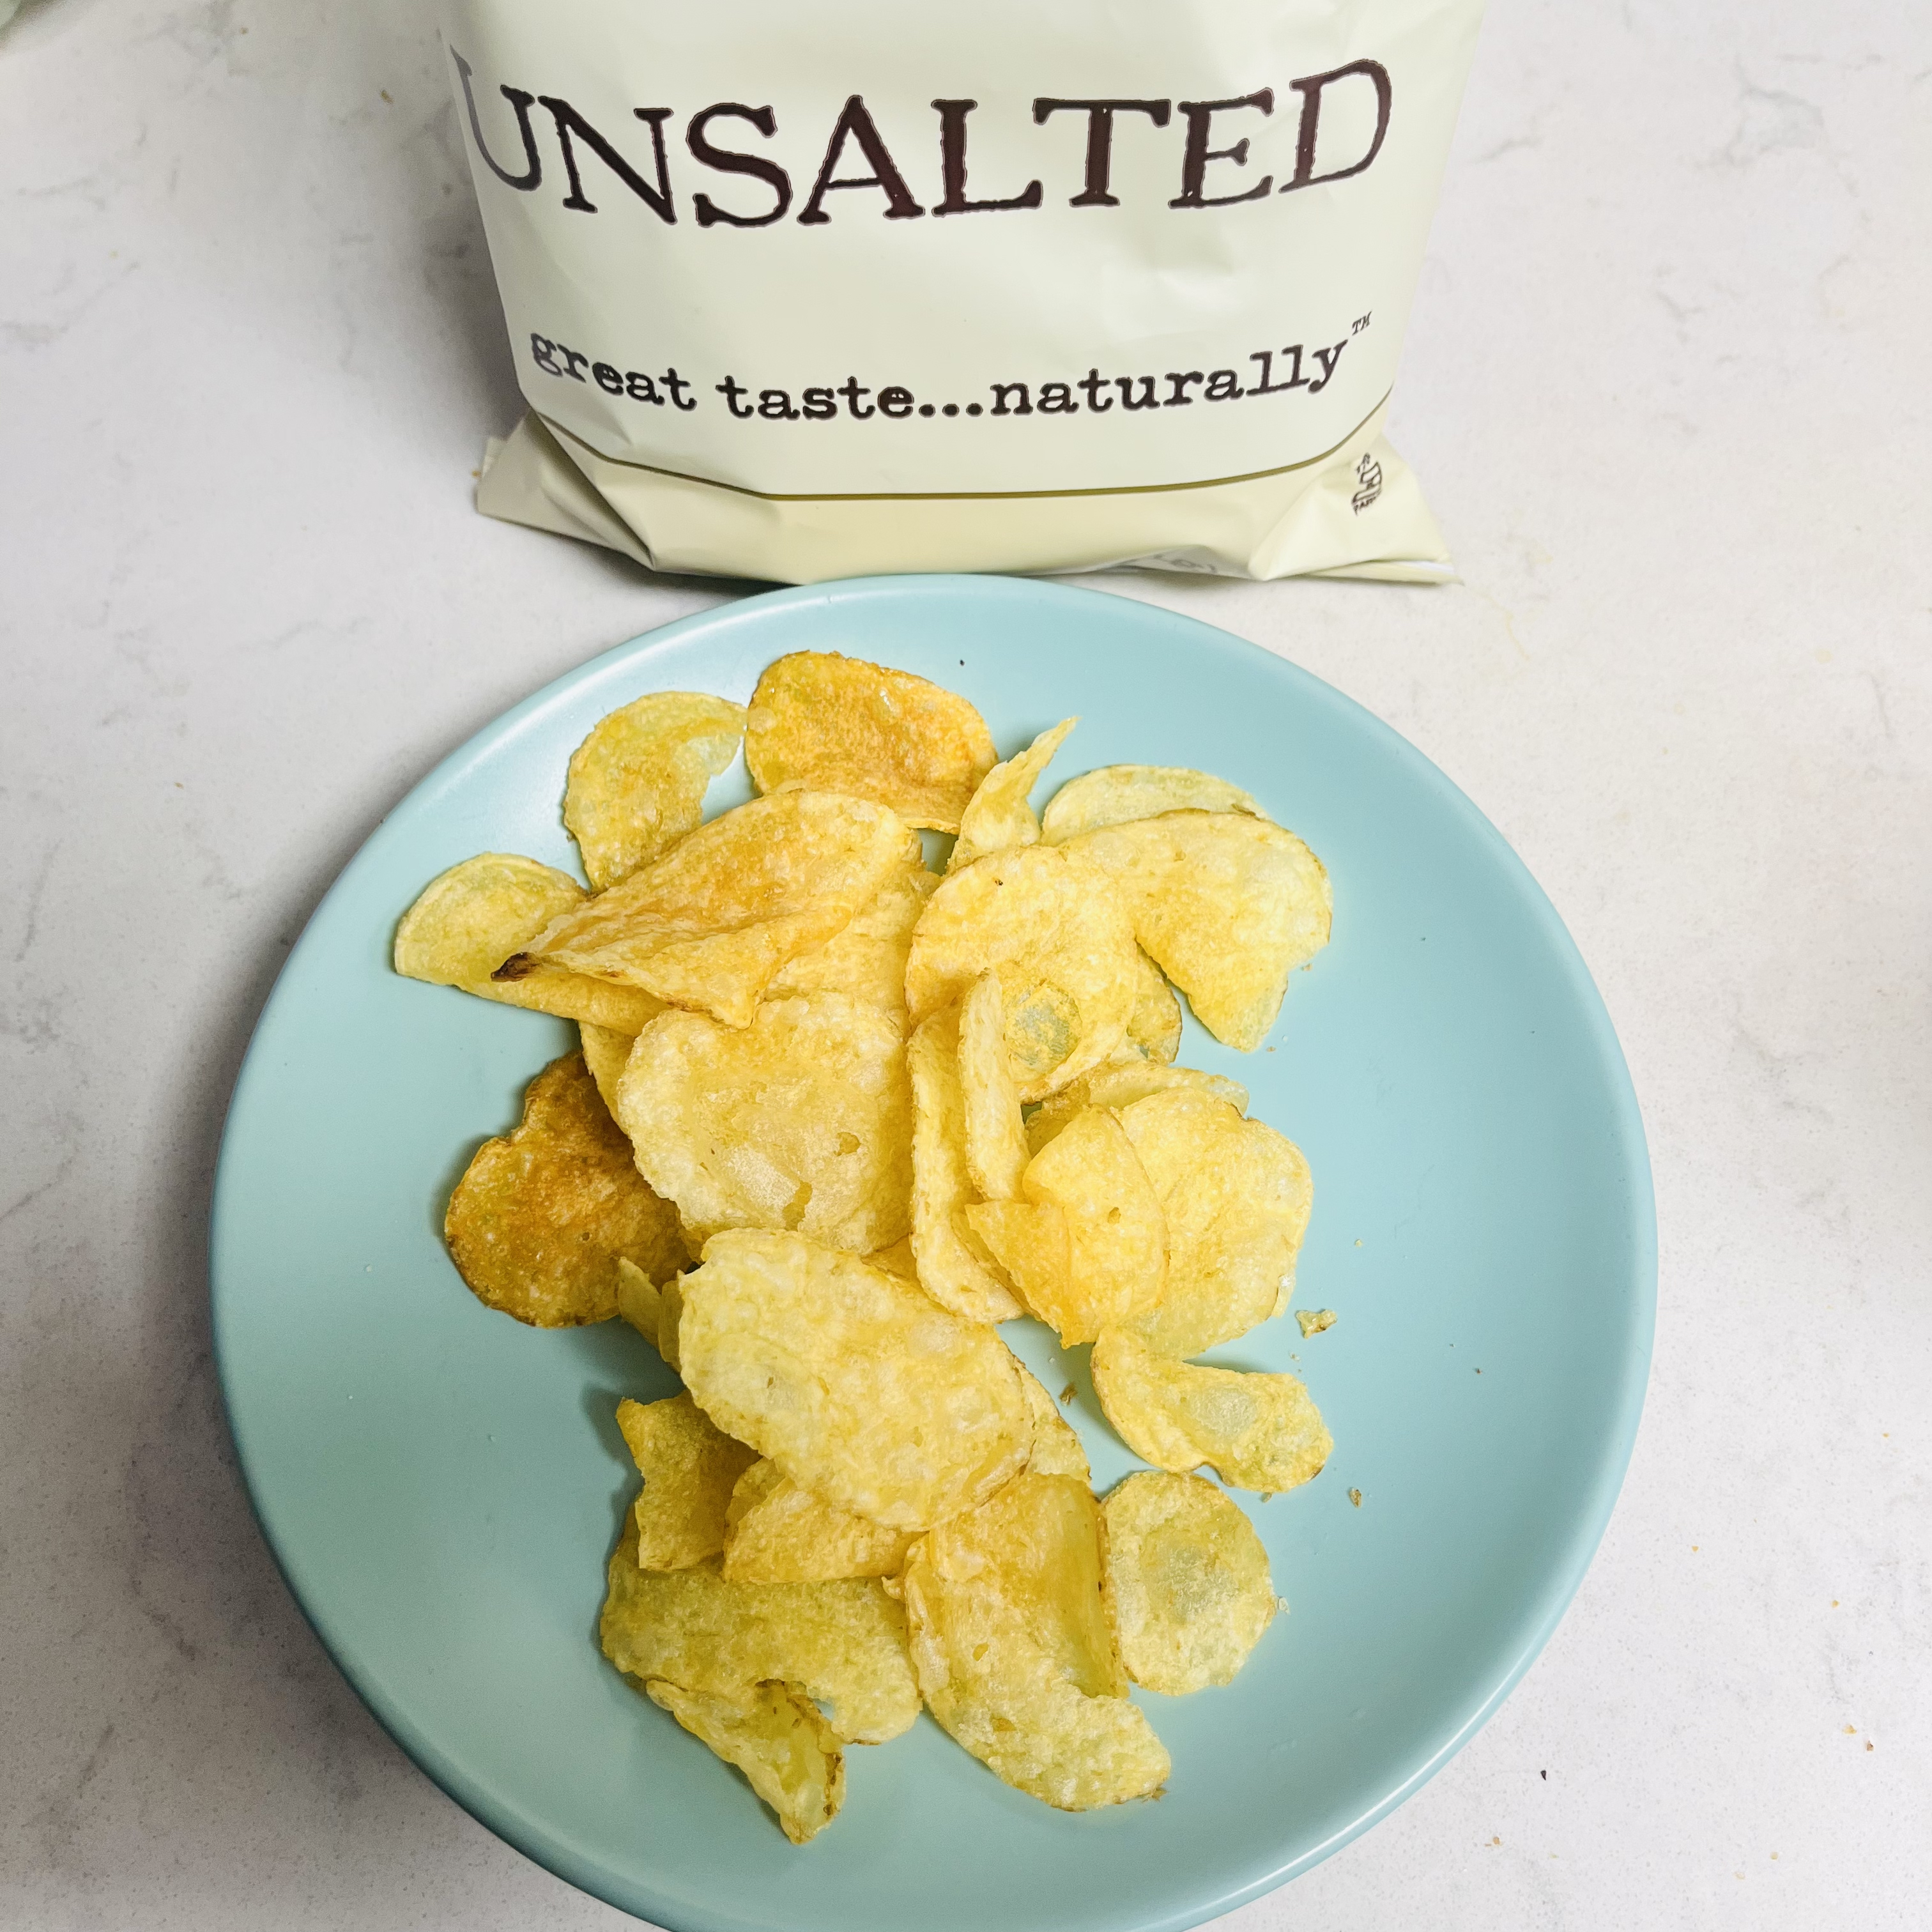 Kettle Brand Unsalted Potato Chips 5 oz Bag (Pack of 15)